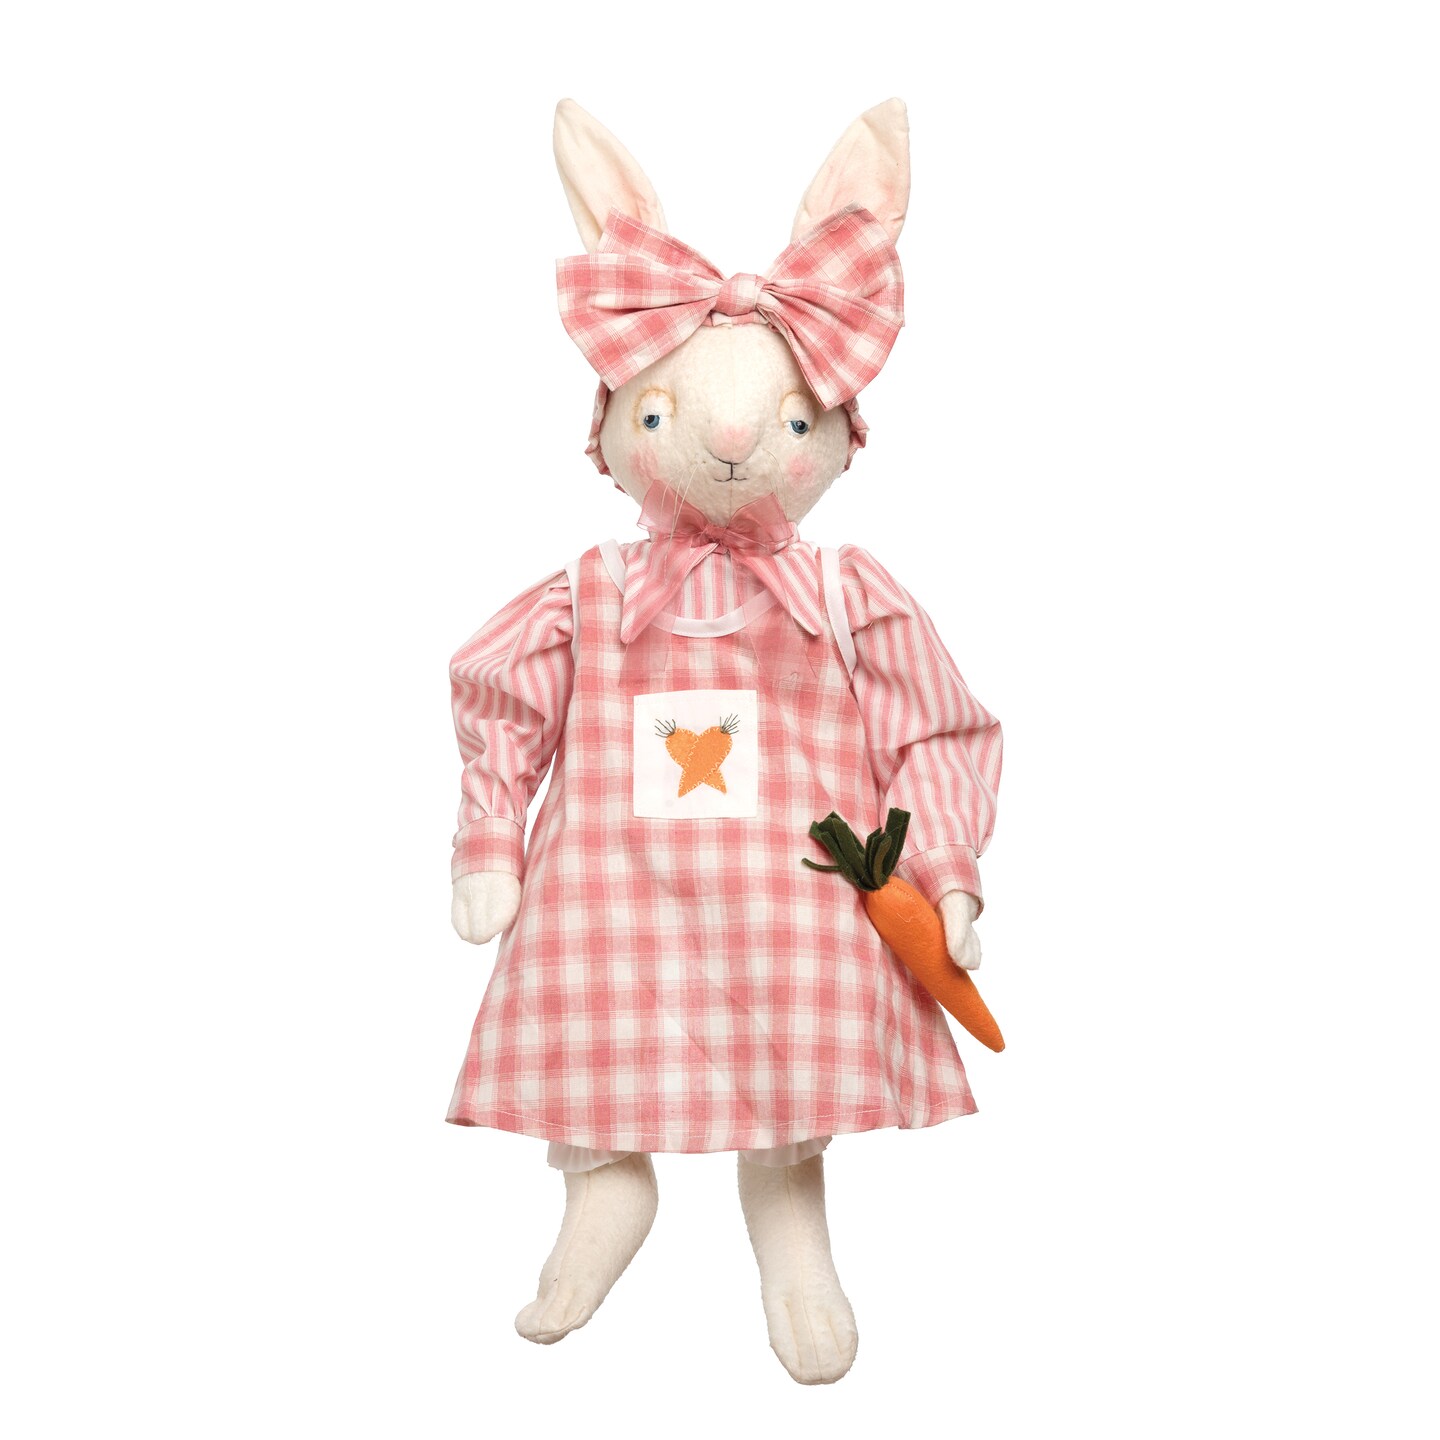 Ally Bunny Easter Gathered Traditions Joe Spencer Figure